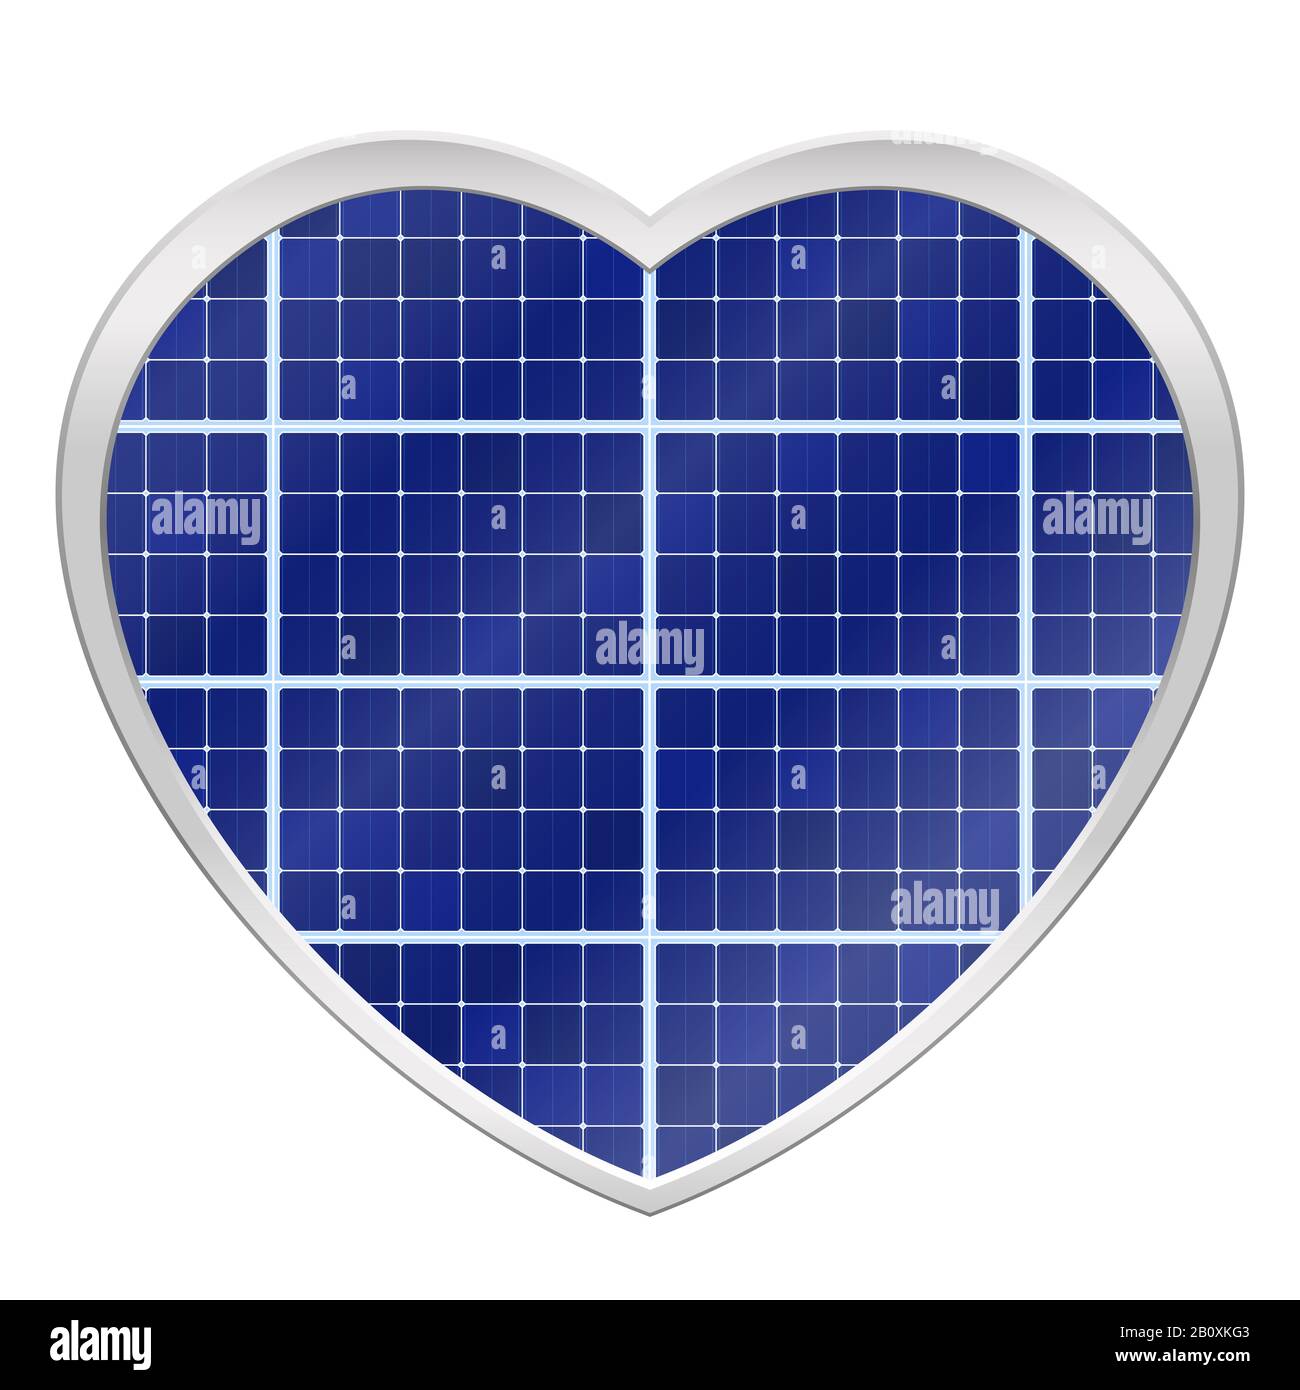 Solar plates collector in a heart shaped frame. Photovoltaic panels symbol - illustration on white background. Stock Photo